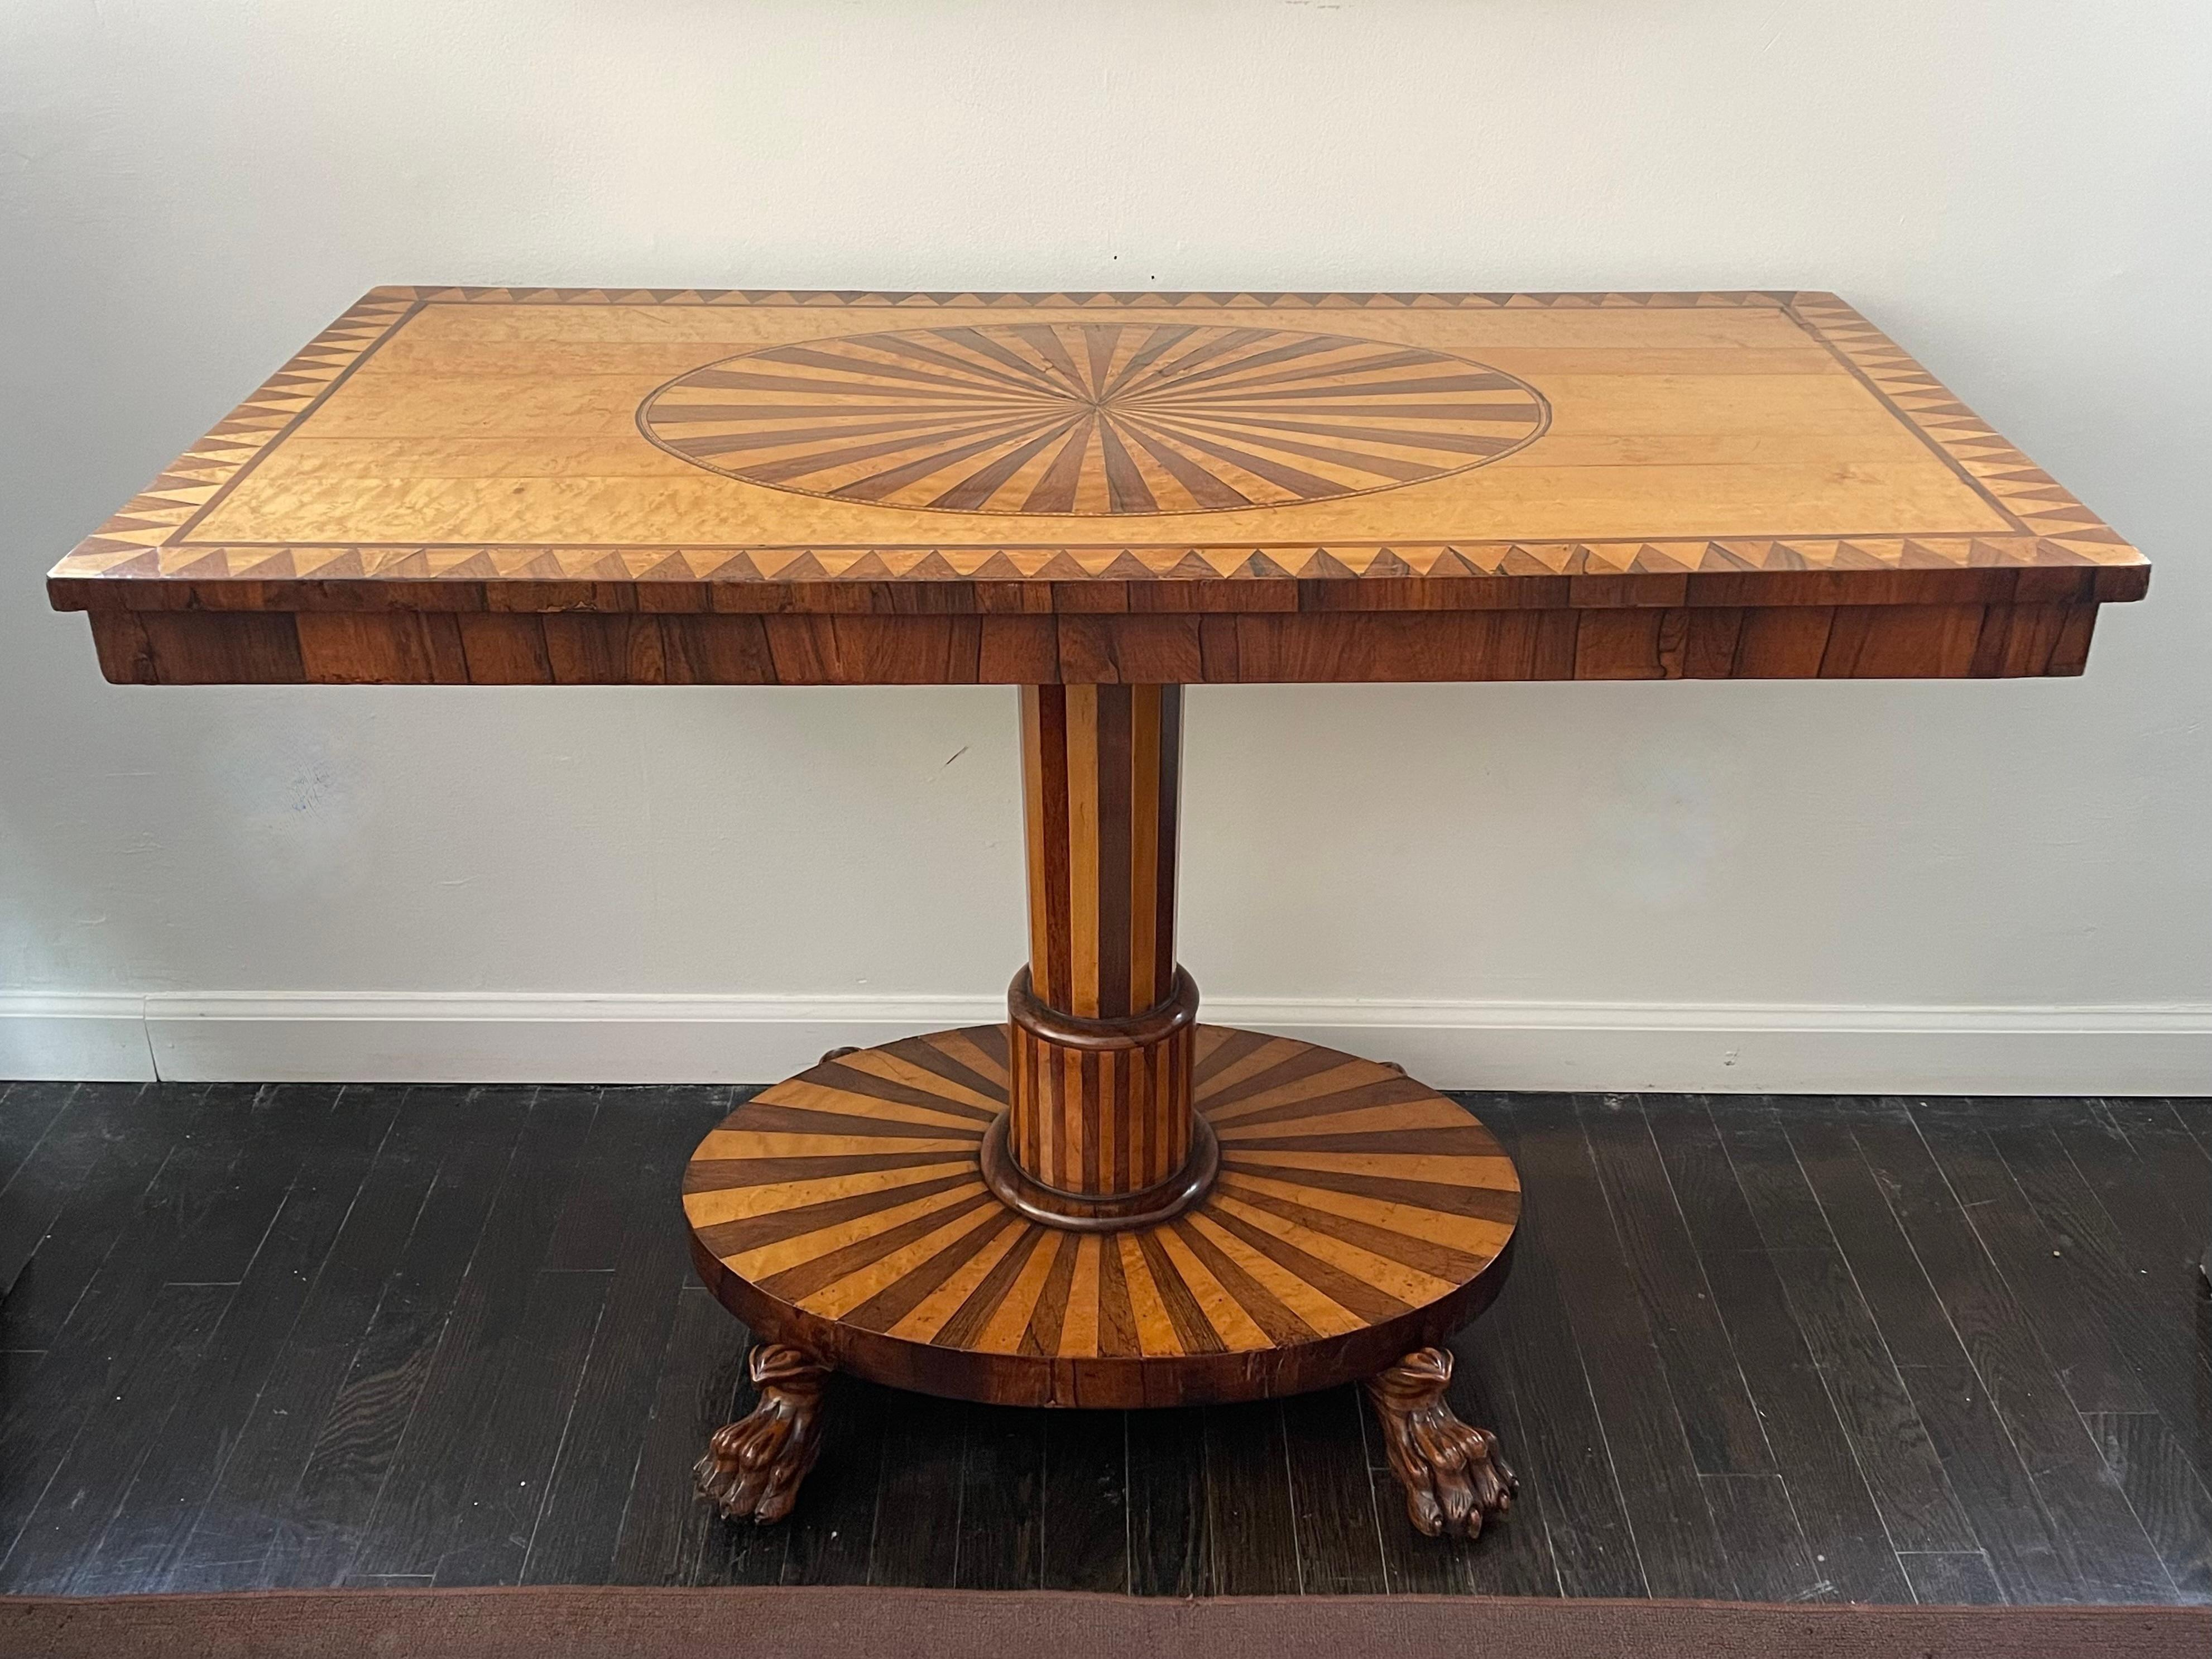 This table’s bold, graphic, and geometrical marquetry in satinwood and rosewood recalls the paintings of Bridget Riley and other 1960s Op Art artists.  The patterning even extends to the table's lion-paw feet, mounted with brass wheels, which were